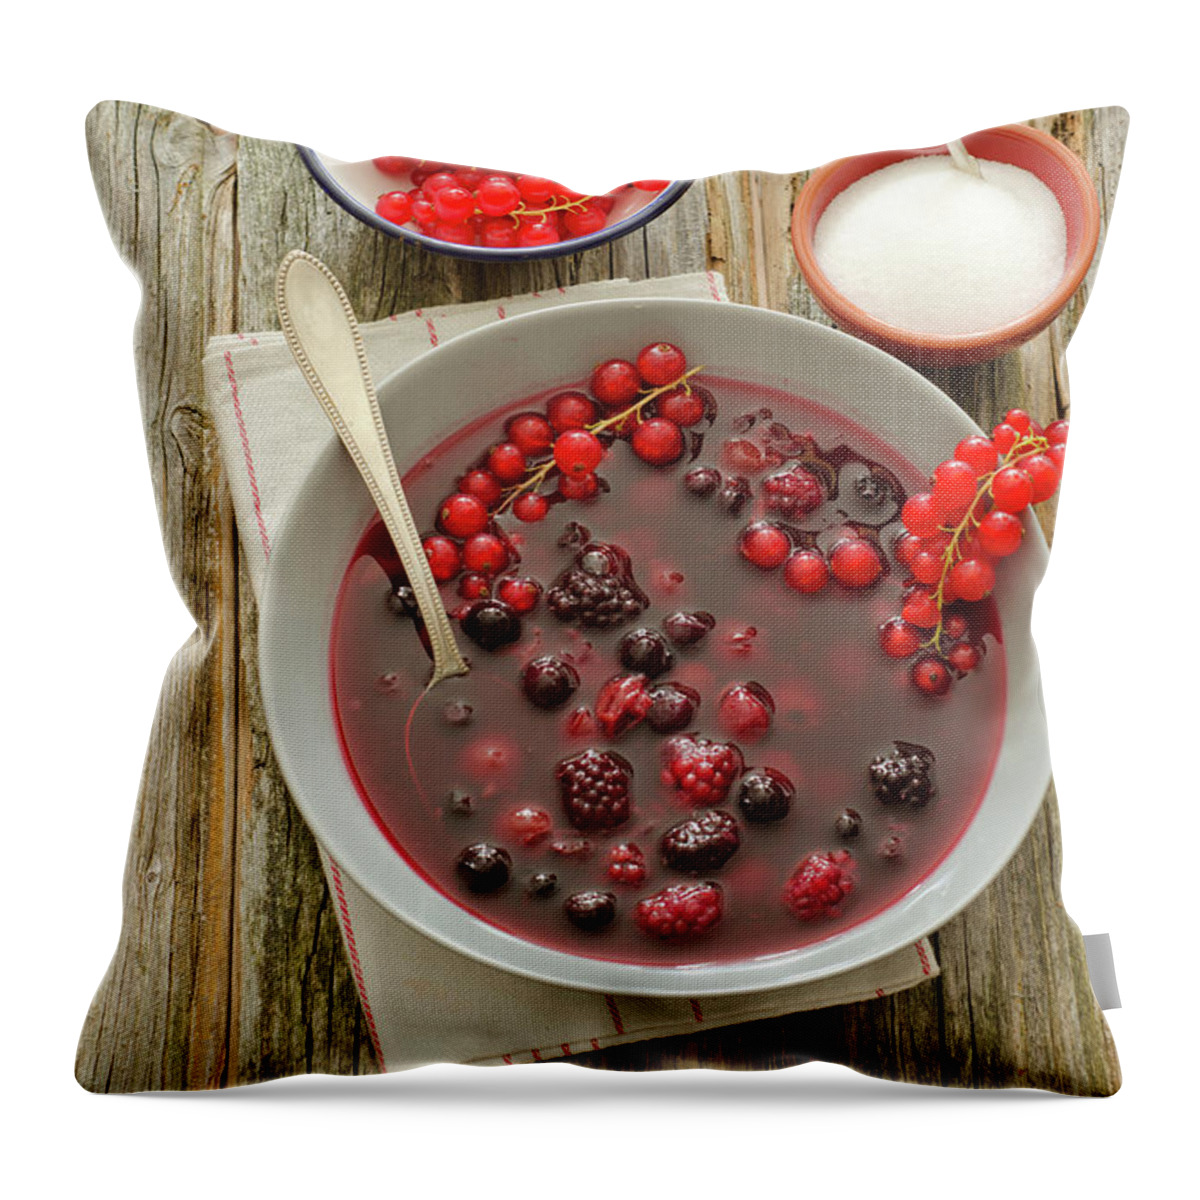 Sugar Throw Pillow featuring the photograph Cold Sweet Soup With Berries On Wooden by Westend61